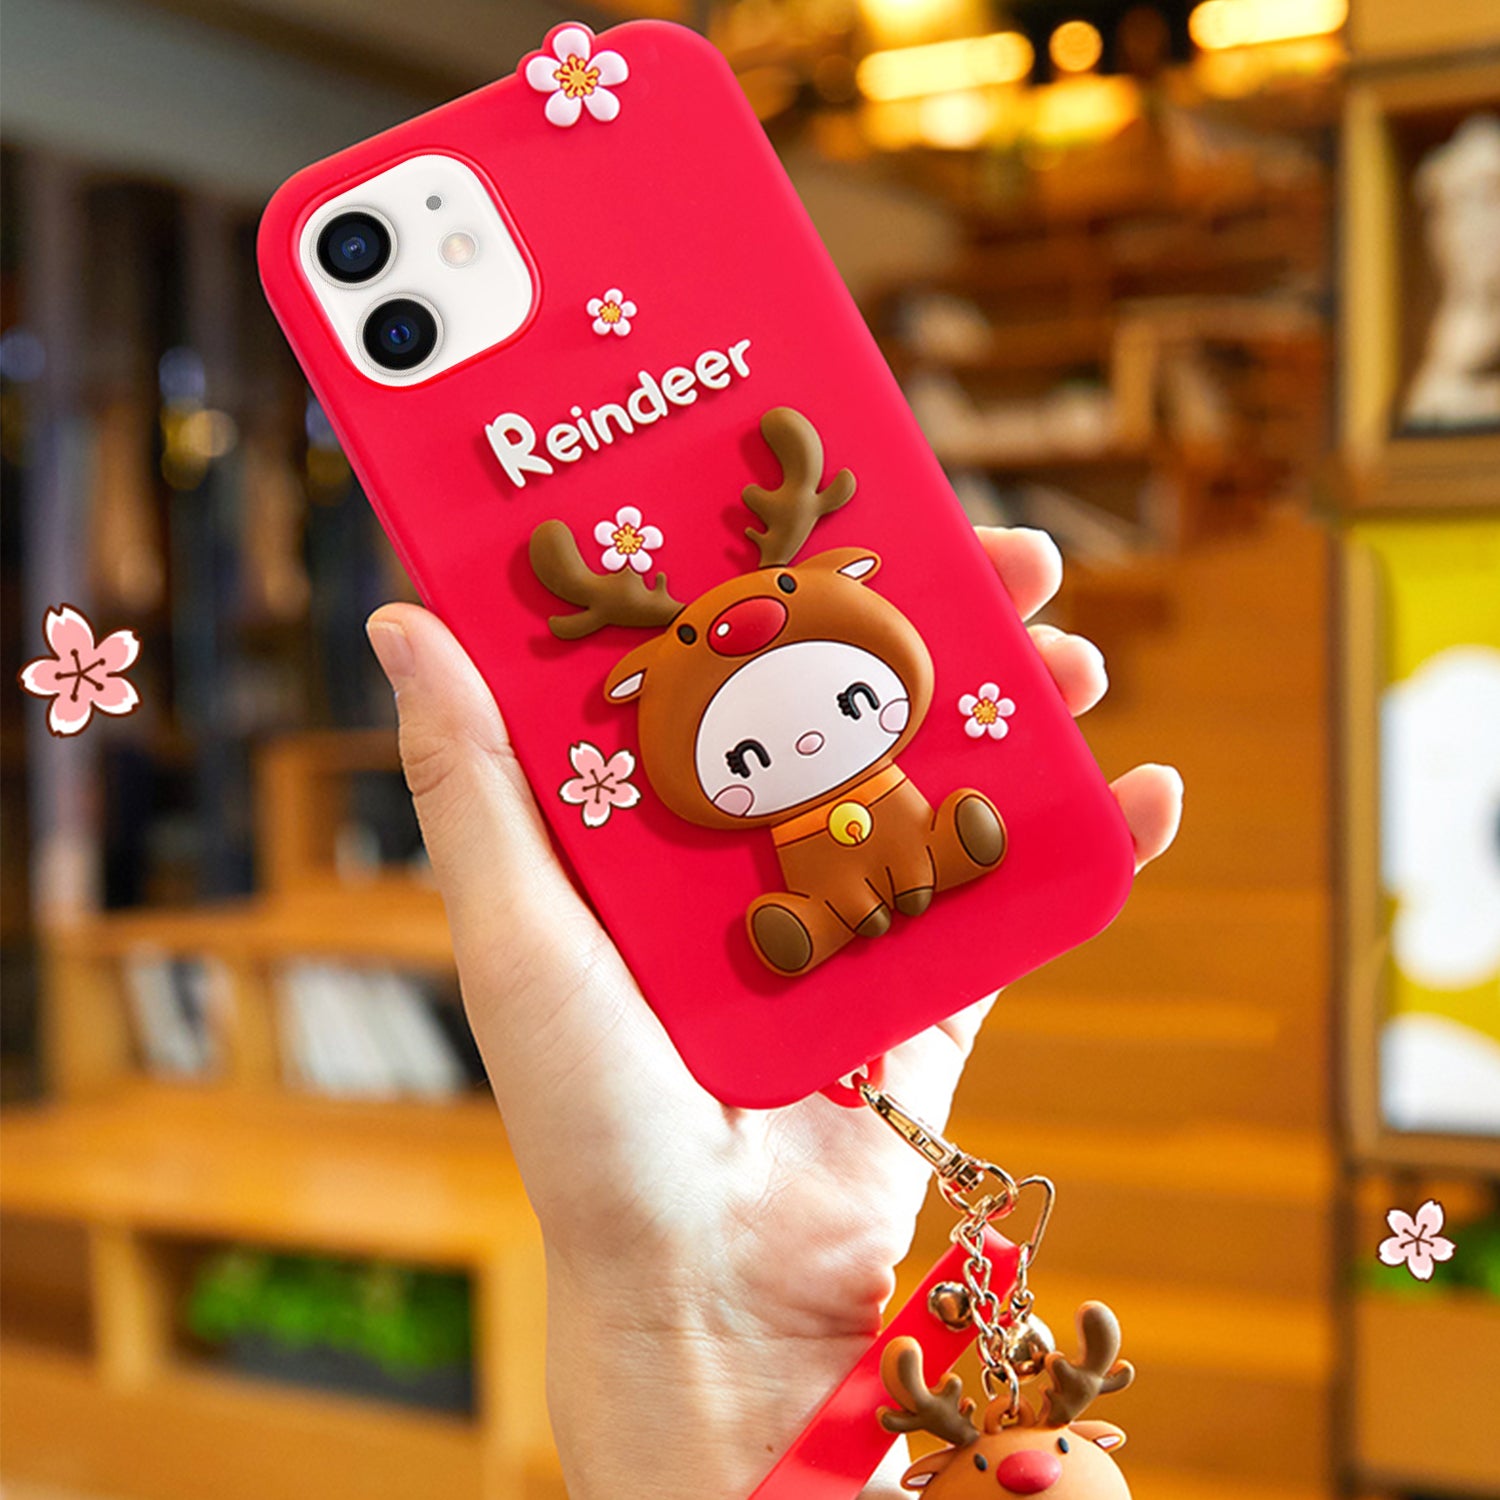 3D Silicone Cute Reindeer With Pendant Cartoon Case for iPhone 12 Mini (5.4") - Pink